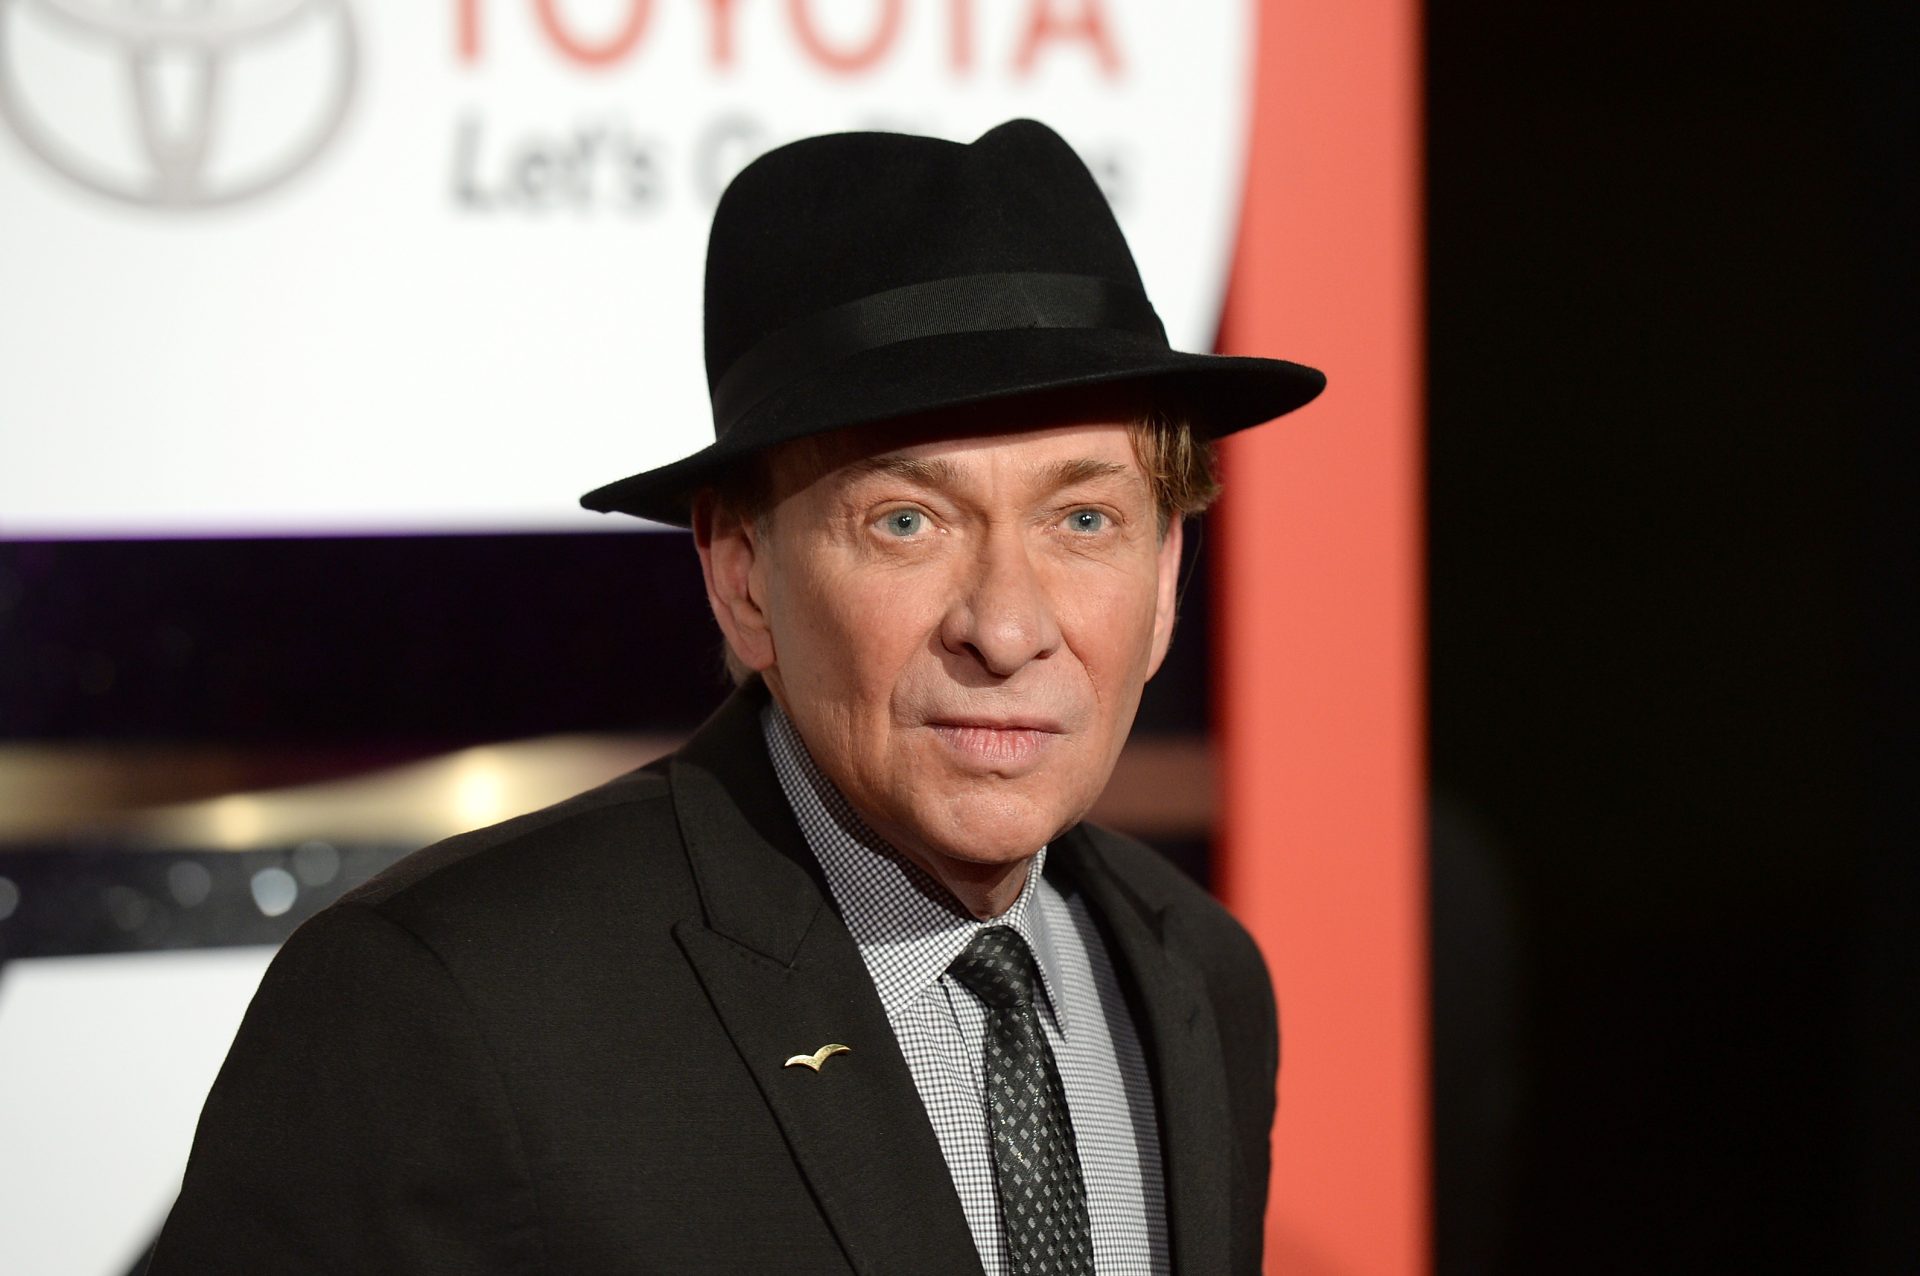 R.I.P. Bobby Caldwell: ‘What You Won’t Do For Love’ Singer Passes Away At 71